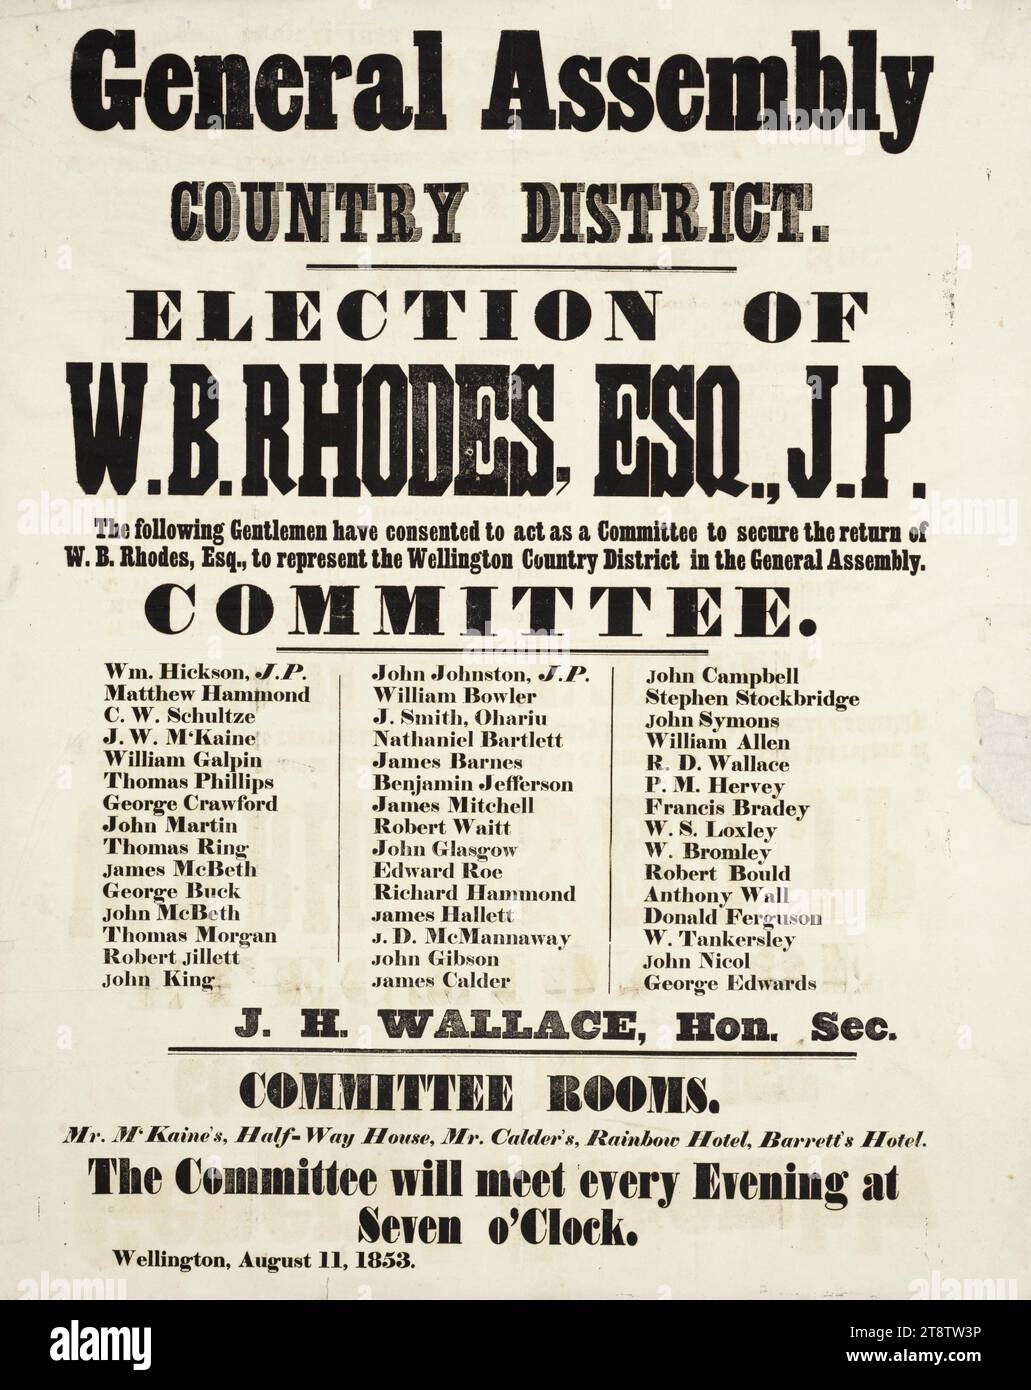 General Assembly, Country district. Election of W. B. Rhodes, esq, J.P. The following gentlemen have consented to act as a committee to secure the return of W B Rhodes, esq, to represent the Wellington, New Zealand Country District in the General Assembly.. Wellin, Arrangement of text. Lists Rhodes' backers as follows: Wm Hickson, Matthew Hammond, C W Schultze, J W M'Kaine, William Galpin, Thomas Phillips, George Crawford, John Martin, Thomas Ring, James McBeth, George Buck, John McBeth, Thomas Morgan, Robert Jillett, John King, John Johnston, William Bowler, J Smith (Ohariu), Nathaniel Stock Photo